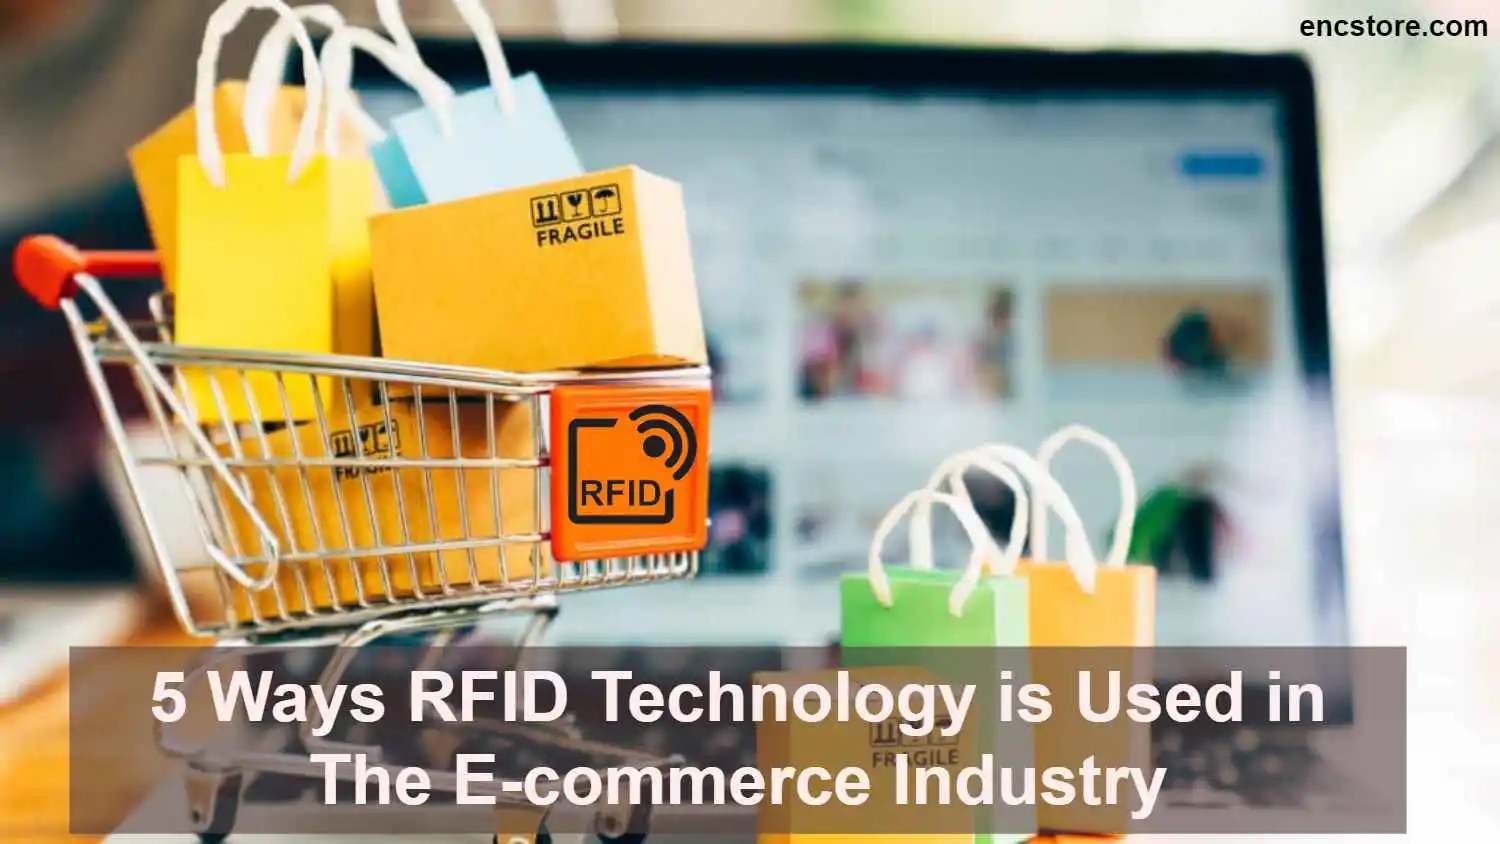 5 Ways RFID Technology is Used in the E-commerce Industry